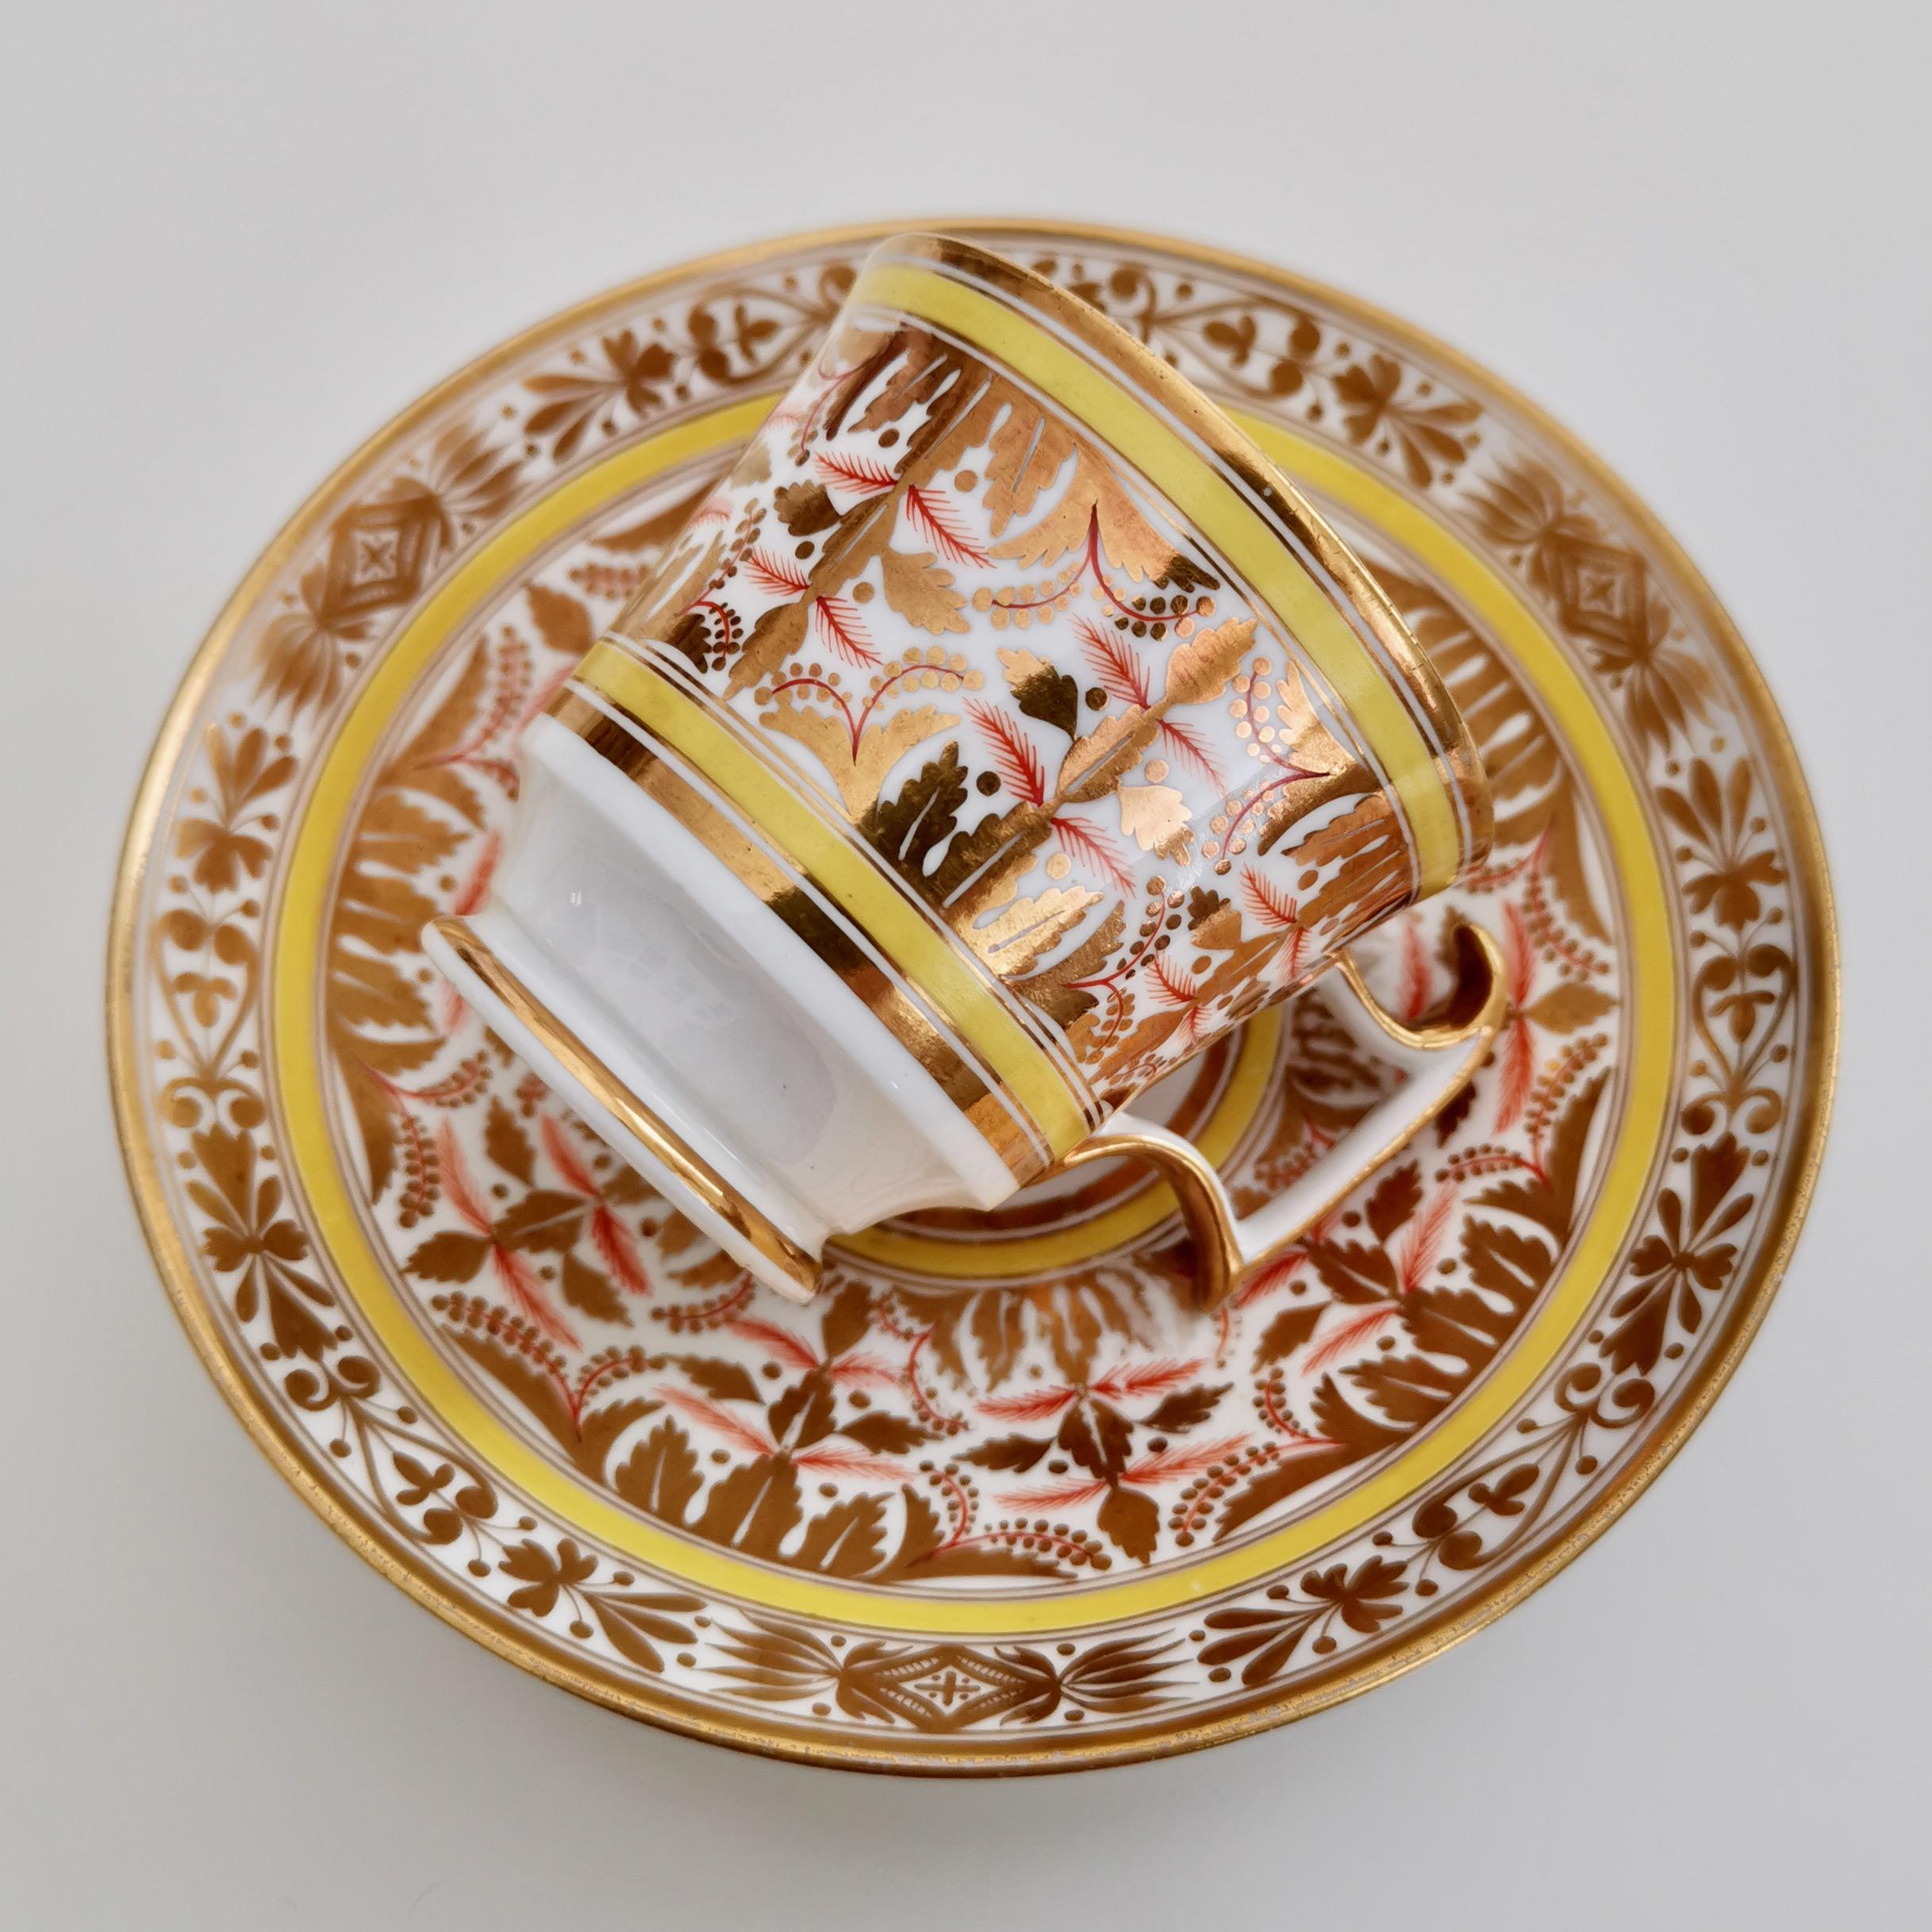 Early 19th Century Spode Porcelain Teacup Set, Gilt, Yellow and Red Regency Pattern, circa 1815